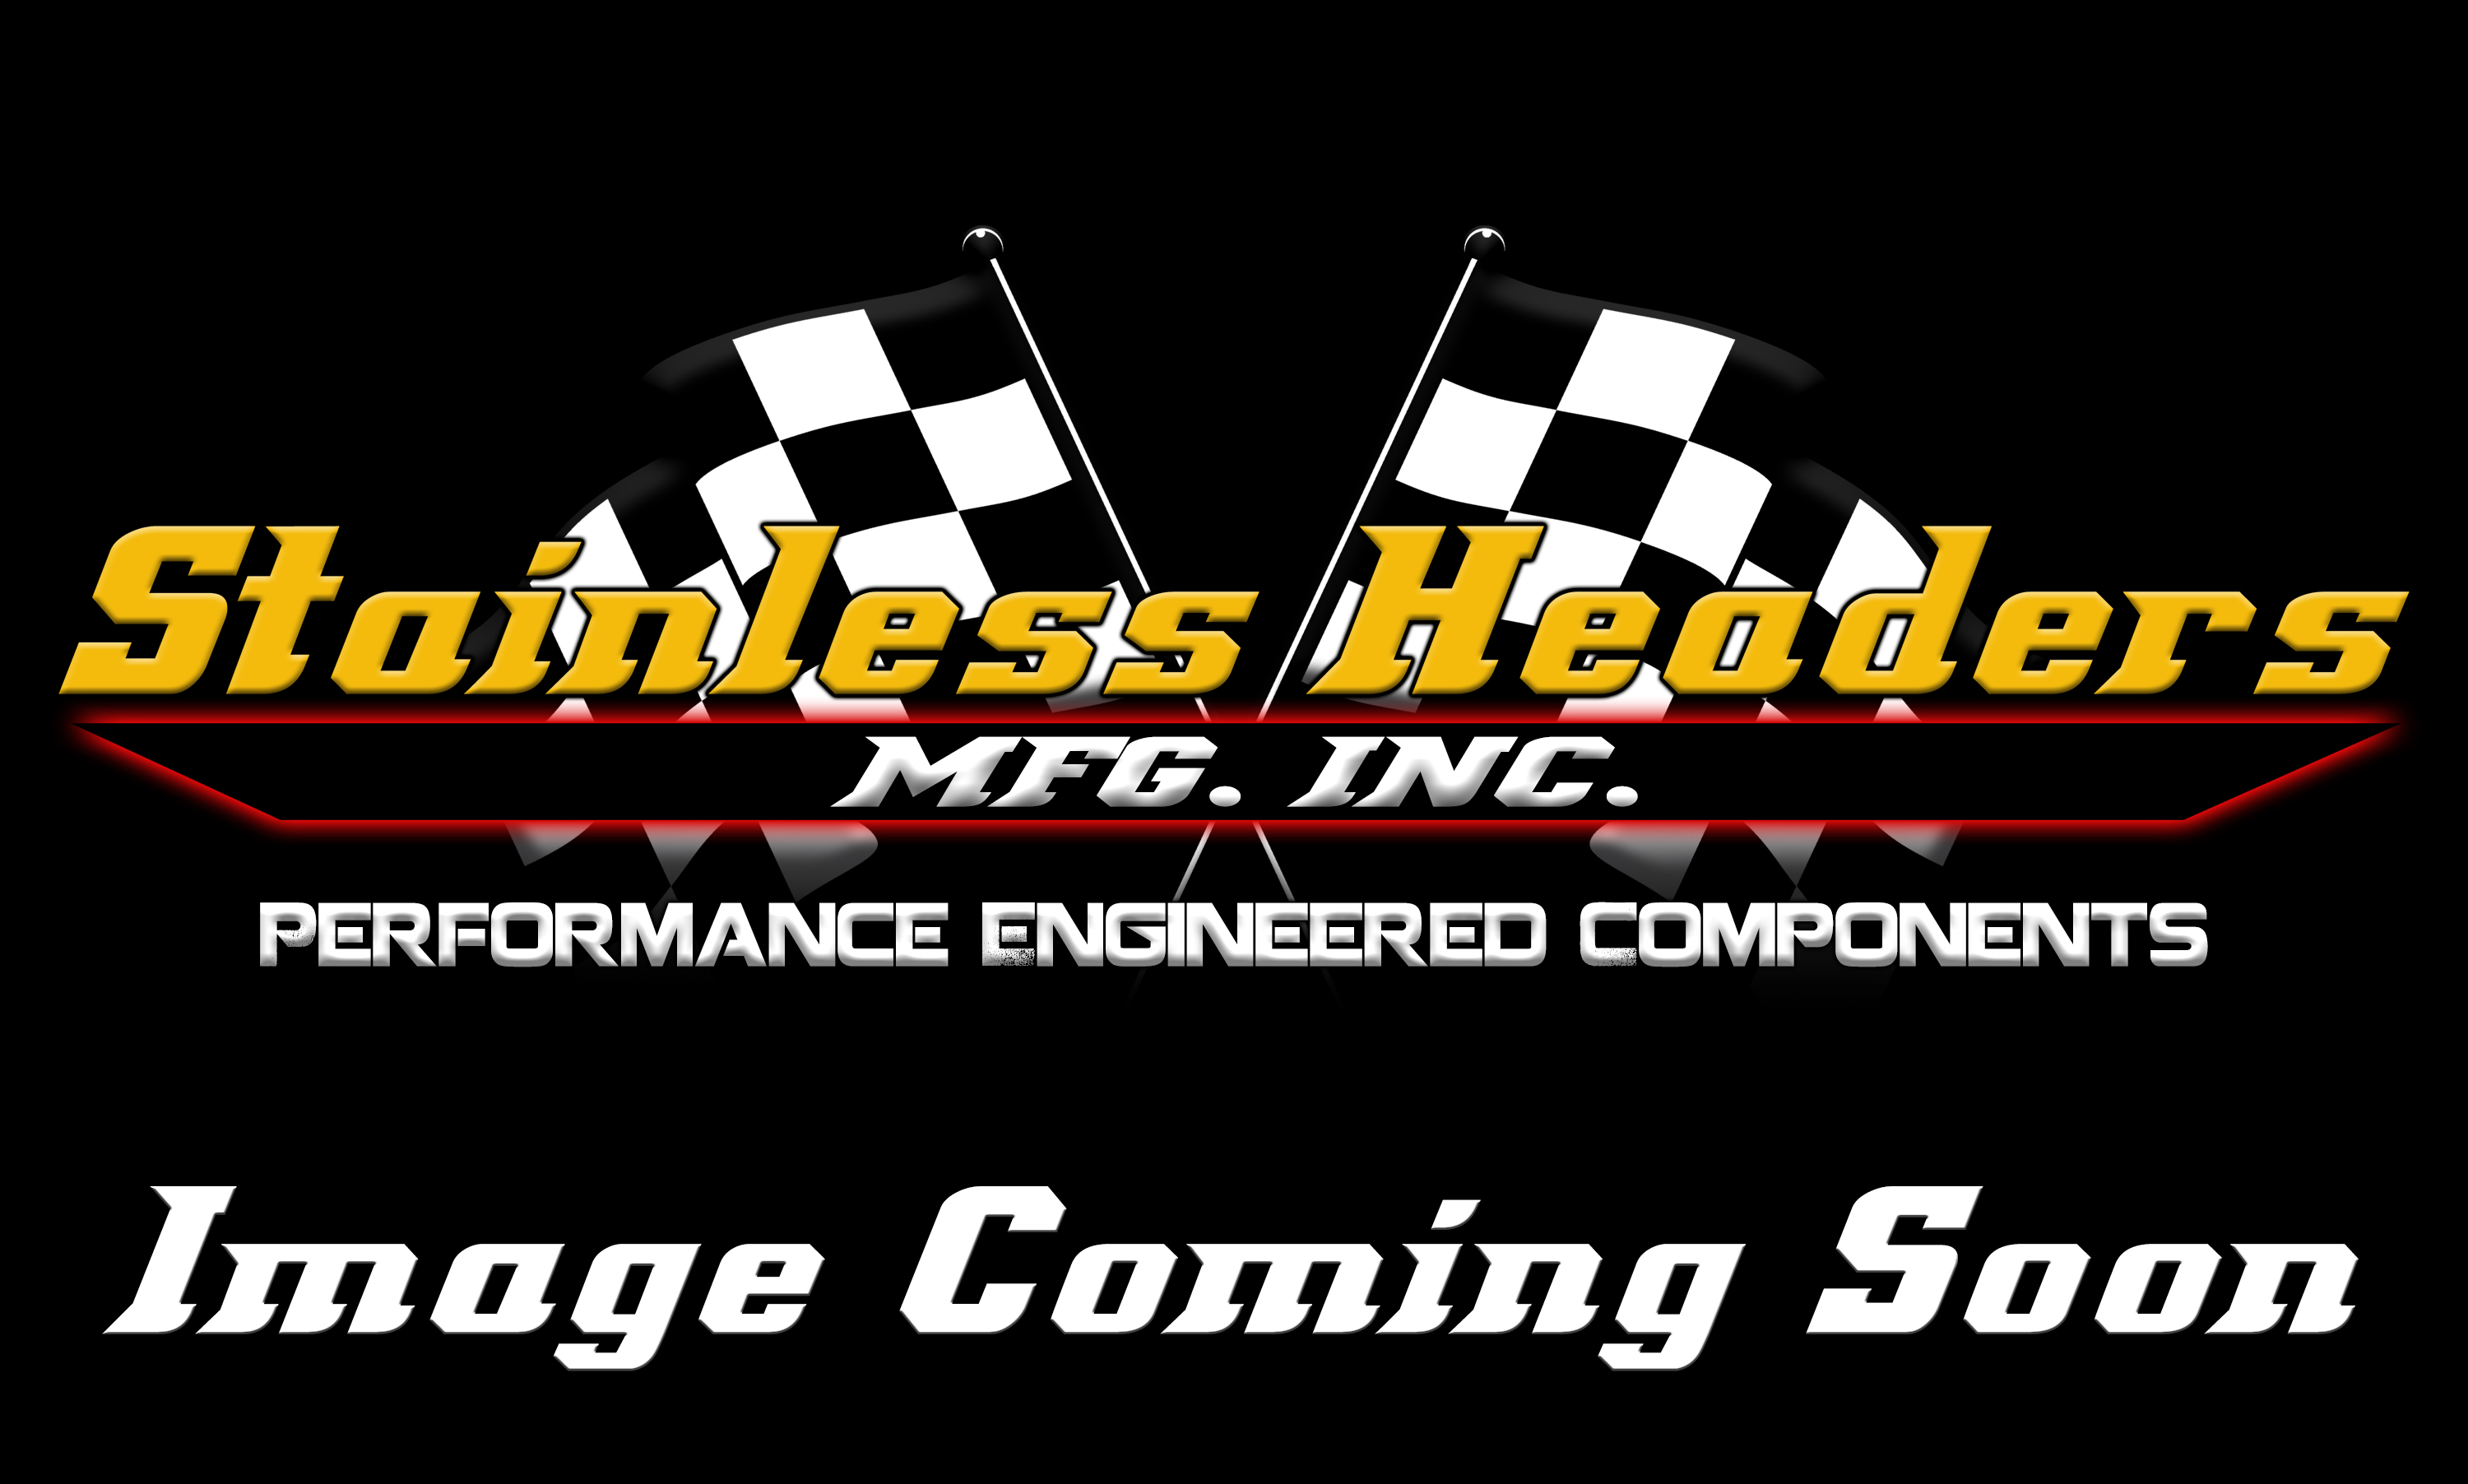 CompTurbo Technologies - CTR4102H-7275 Reverse Rotation Oil-Less 3.0 Turbocharger (1175 HP)